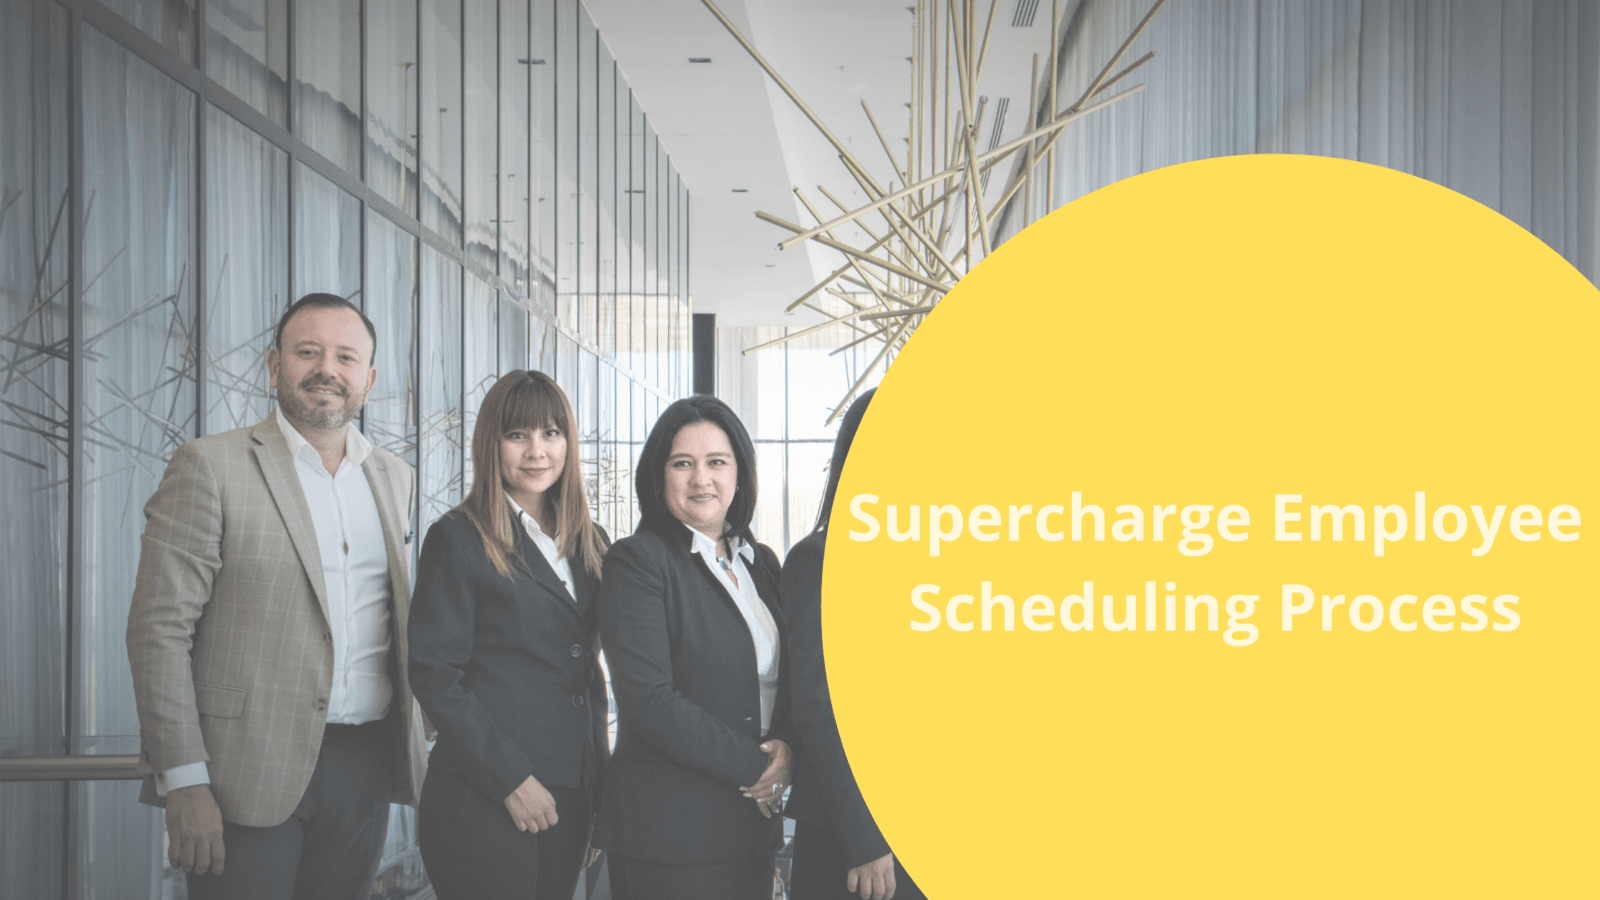 10 tips to supercharge your employee scheduling process | bookafy